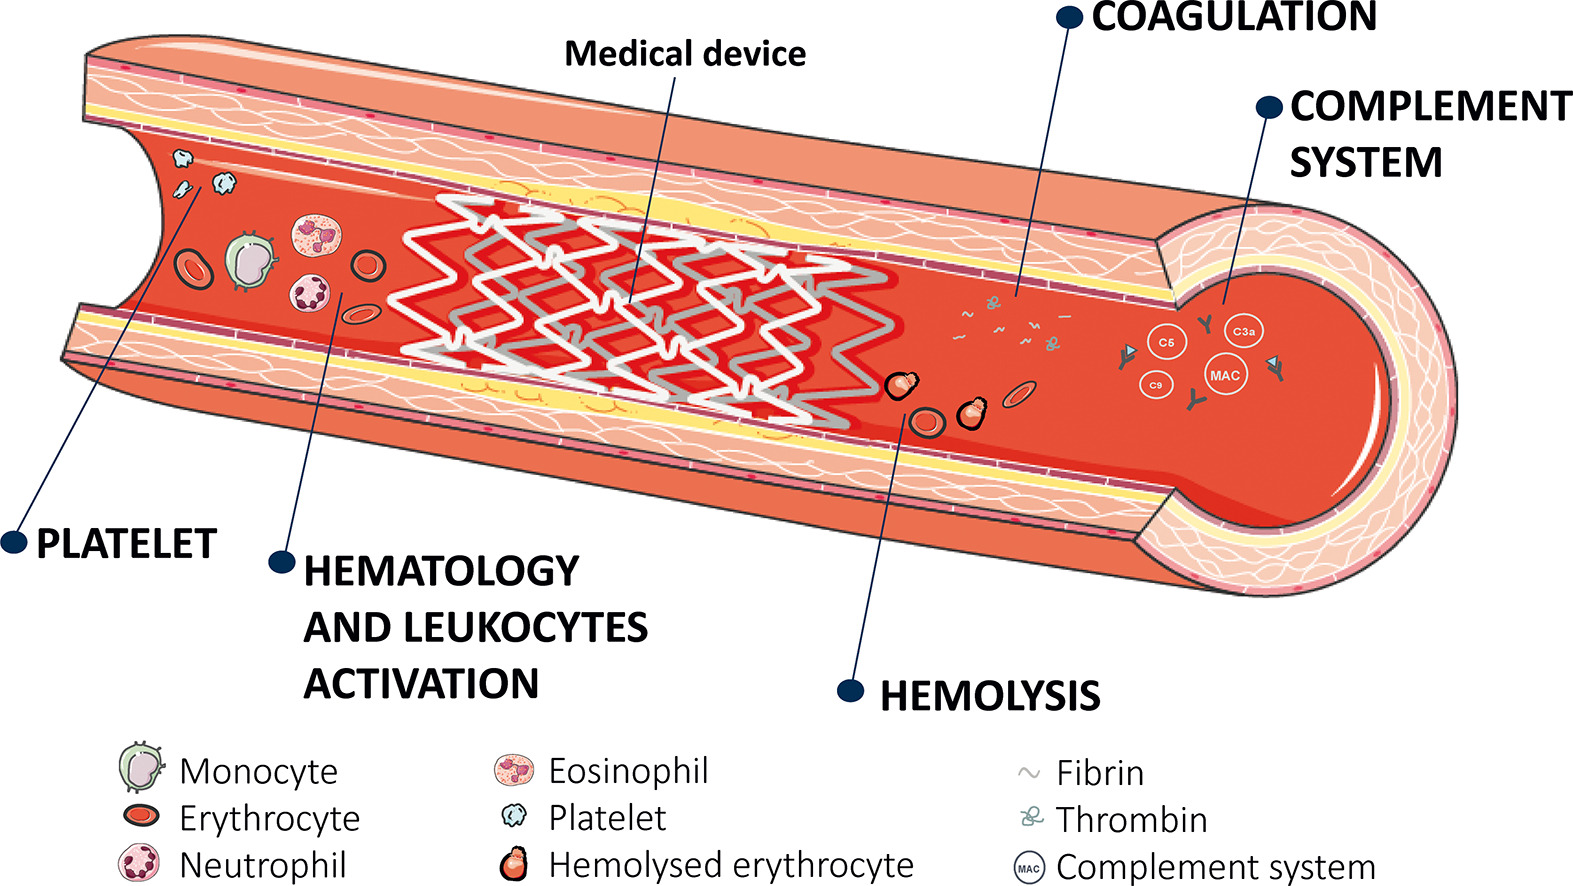 Interaction between medical device and blood.